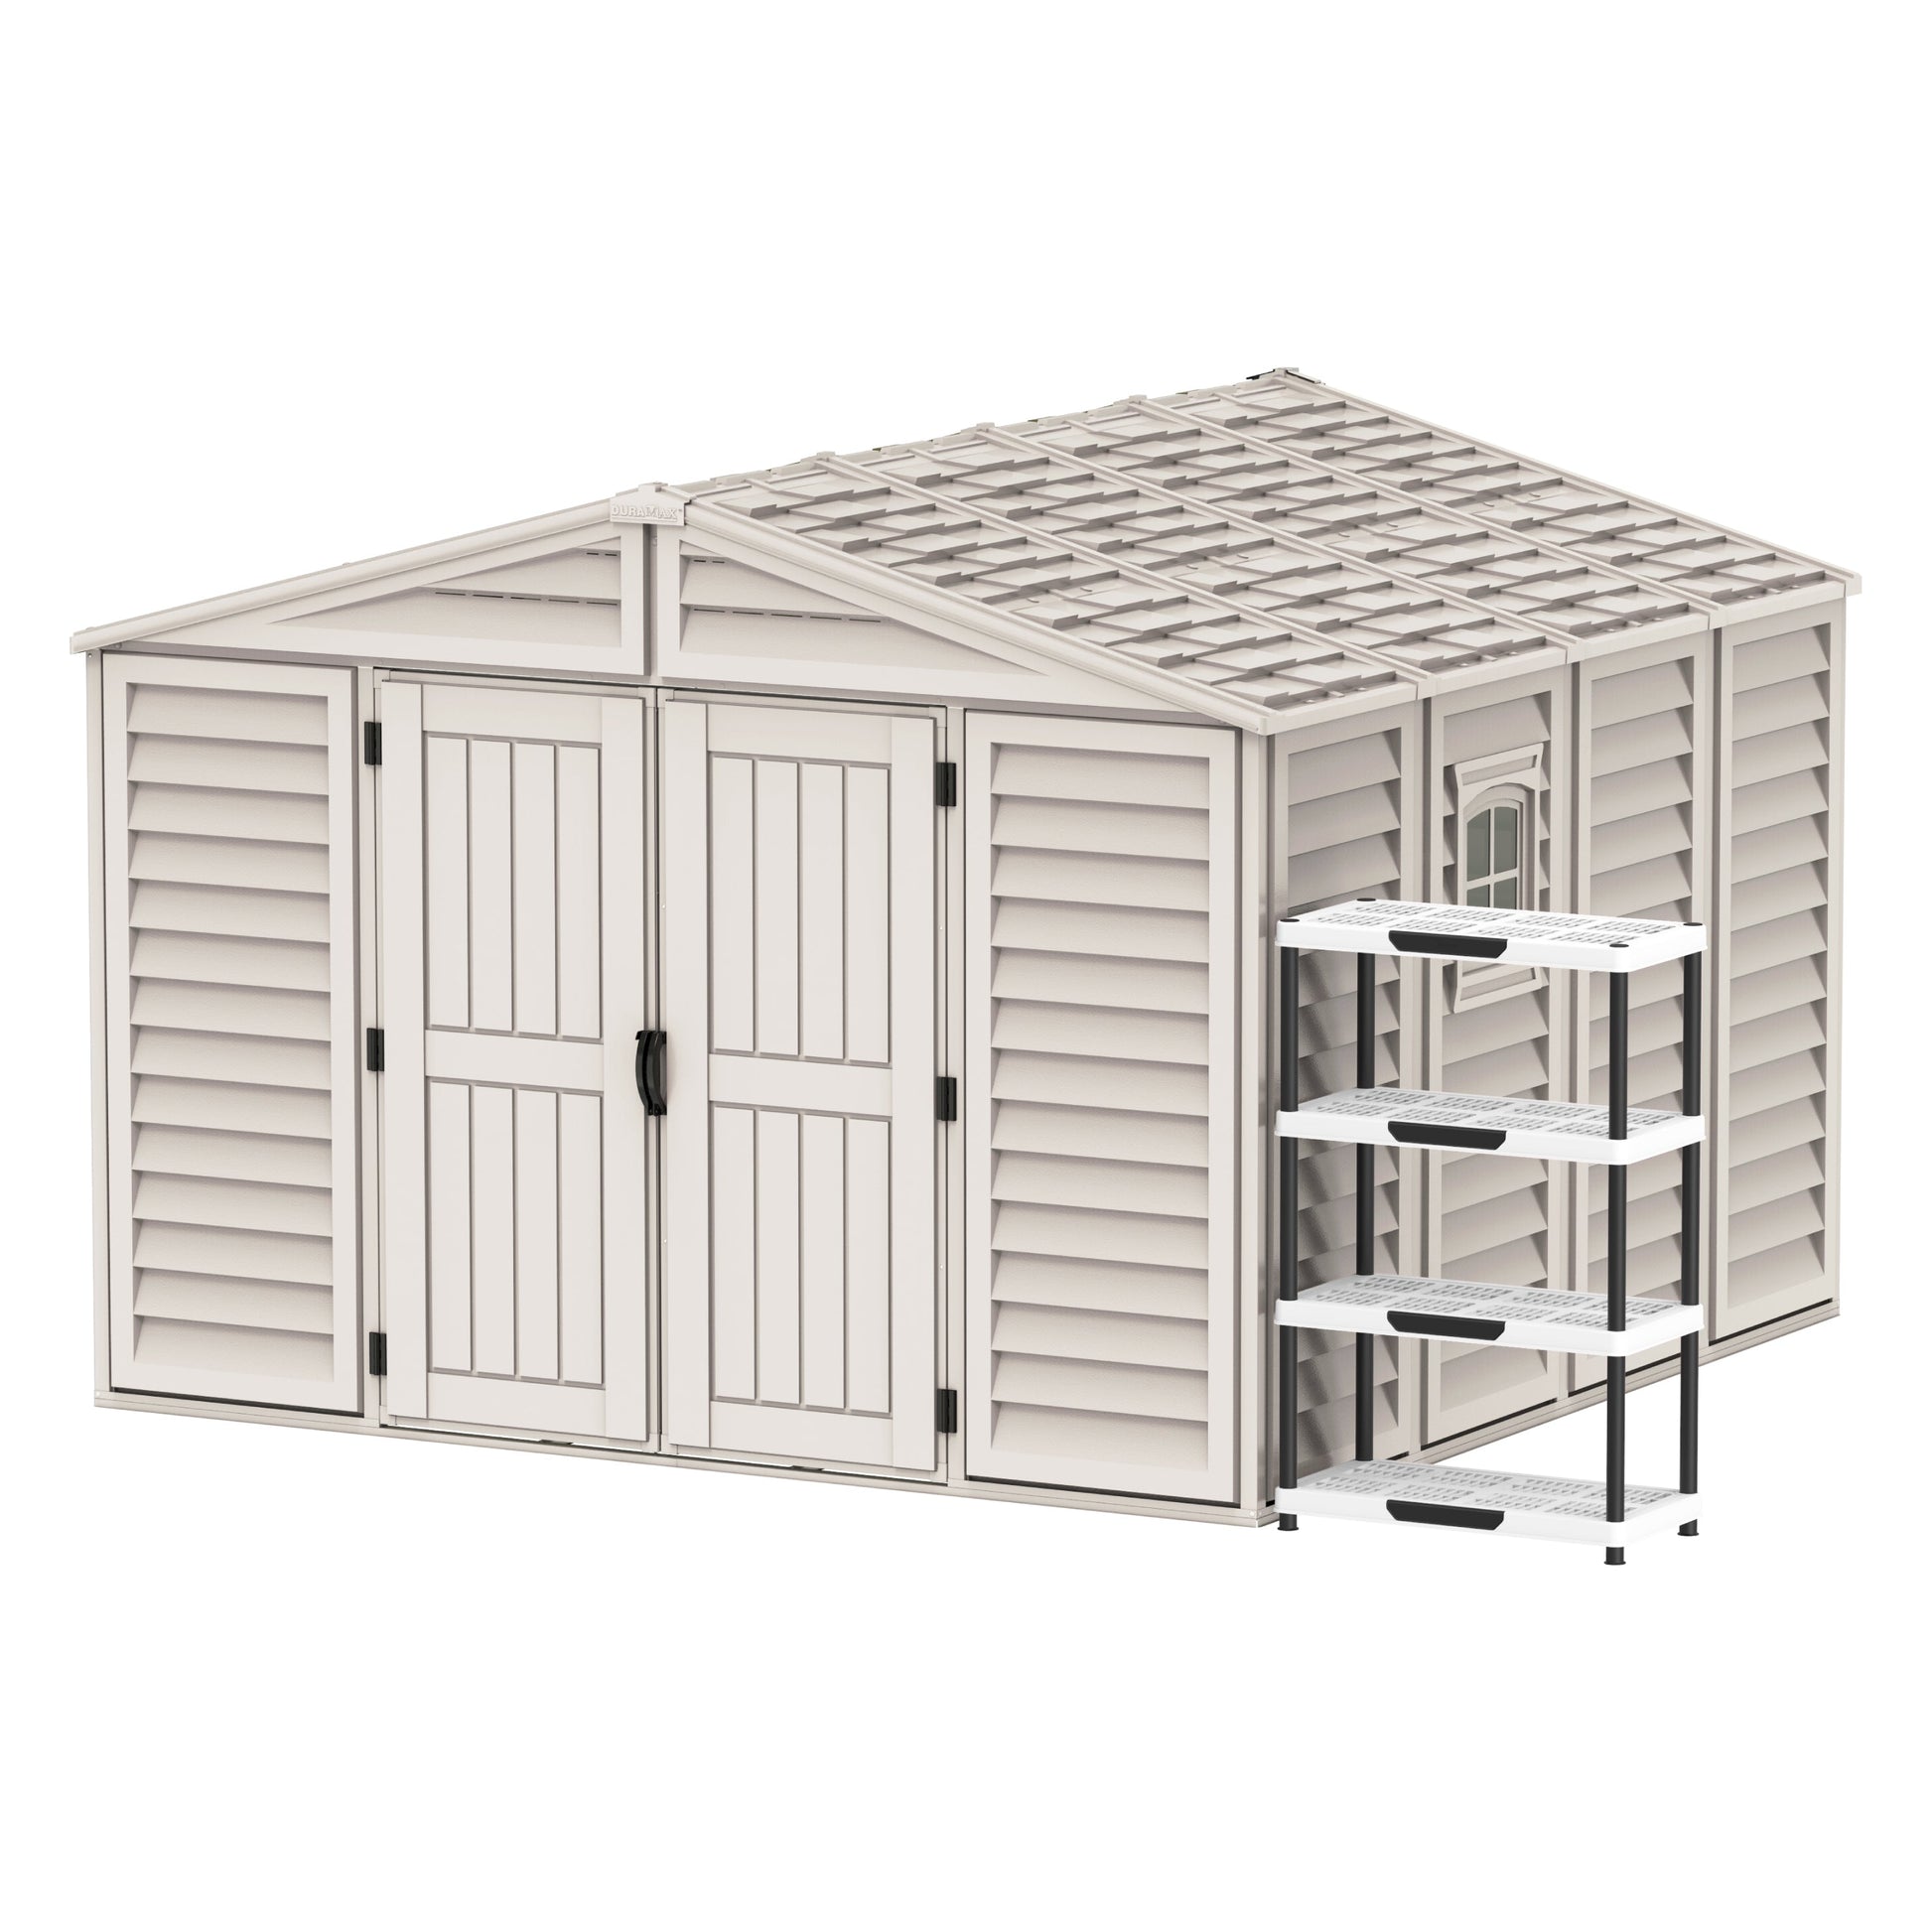 10.5x10.5 ft Walk-in Shed